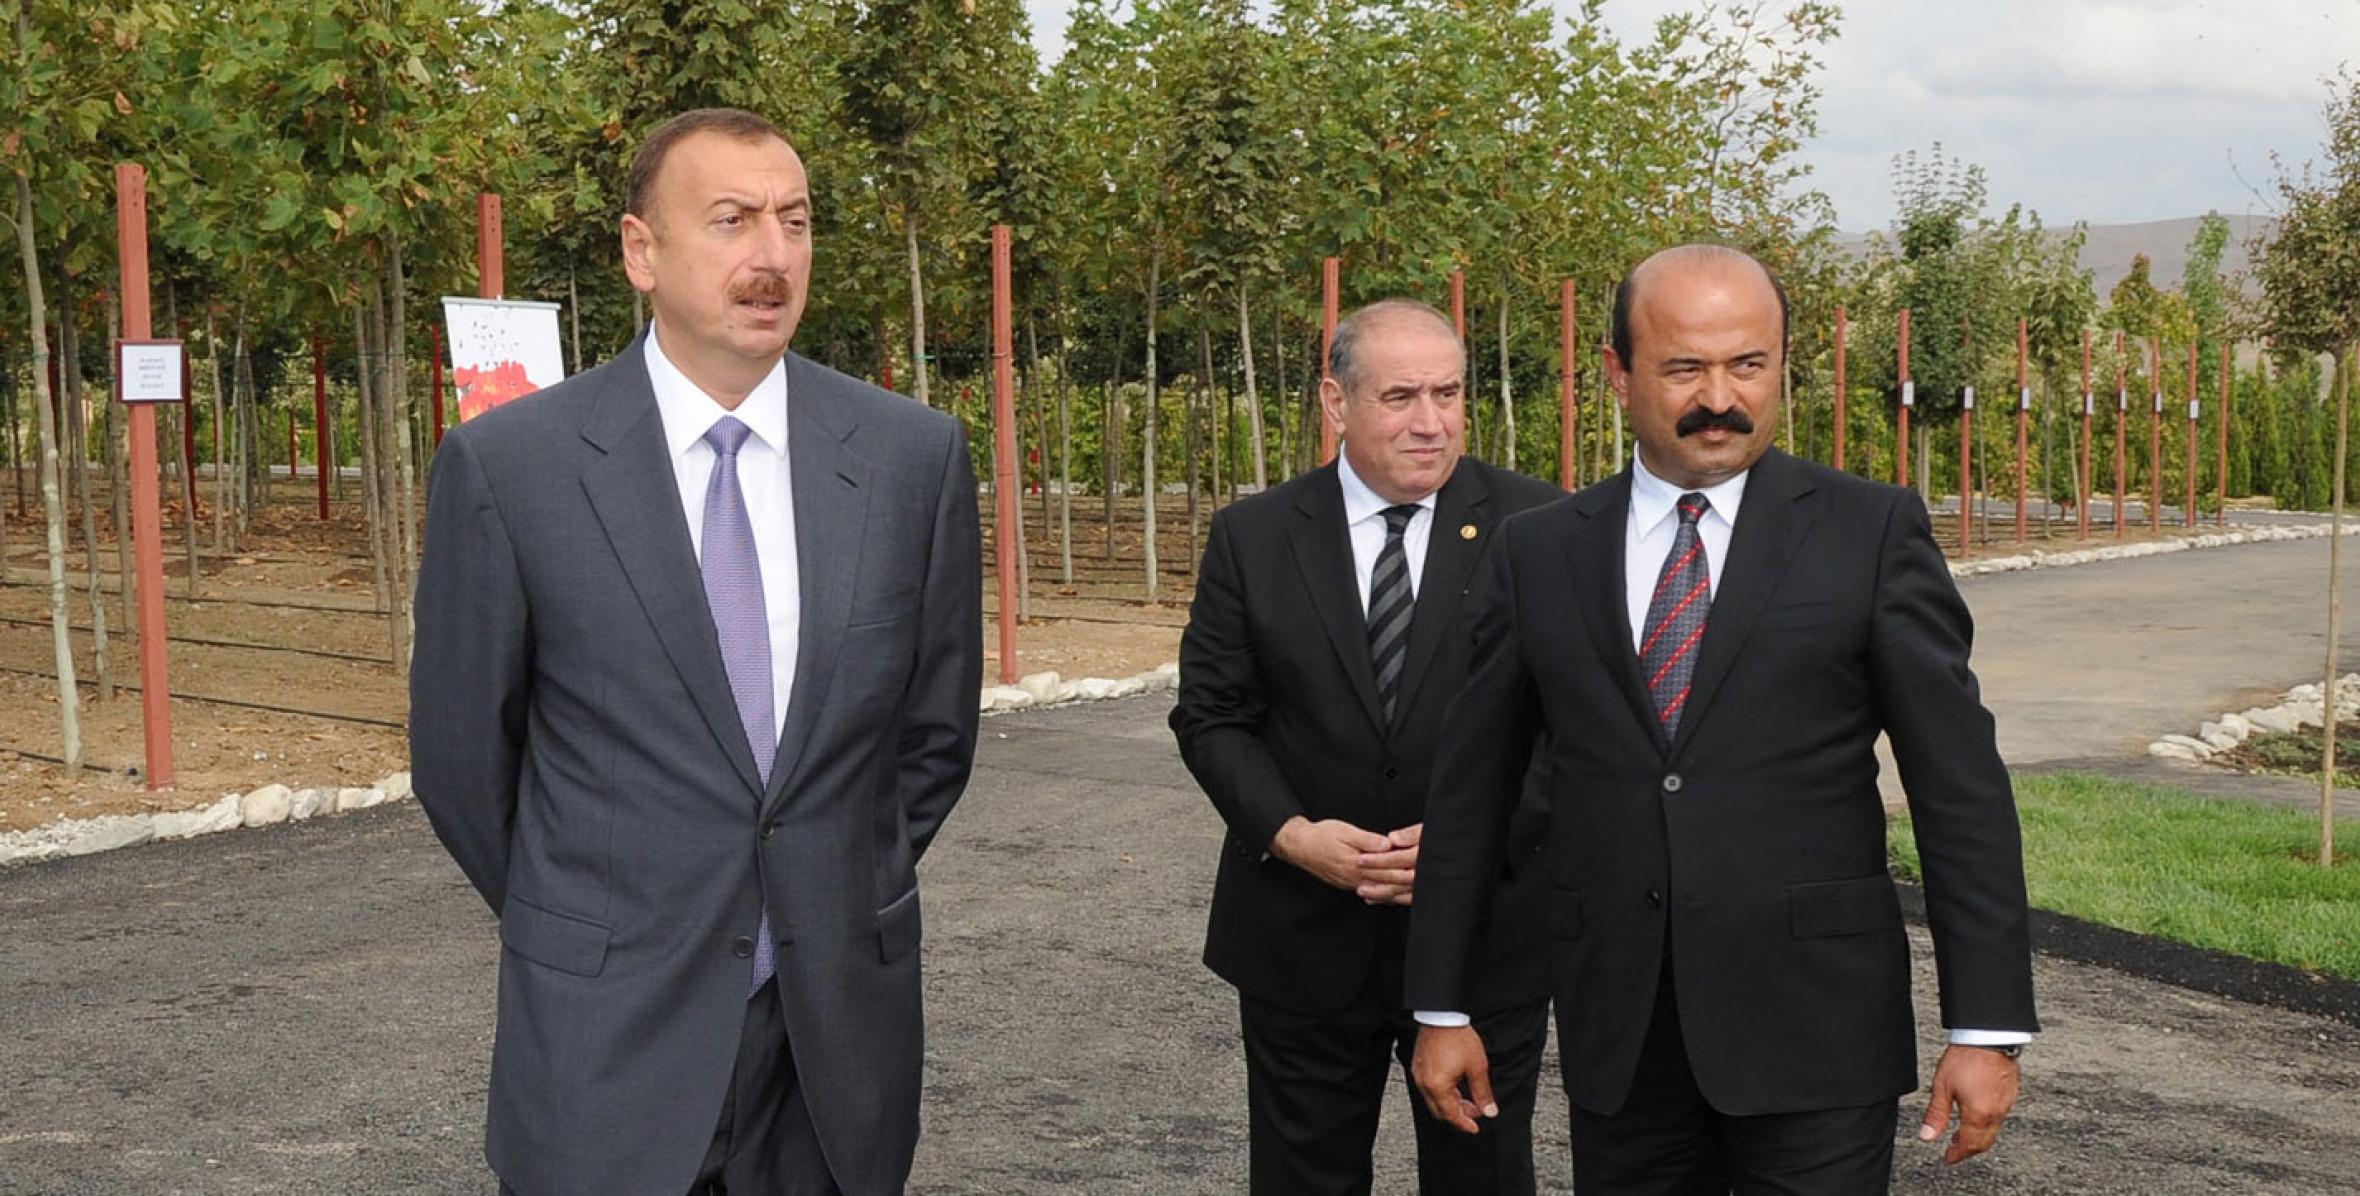 Ilham Aliyev attended the opening of the Gobustan seedling center